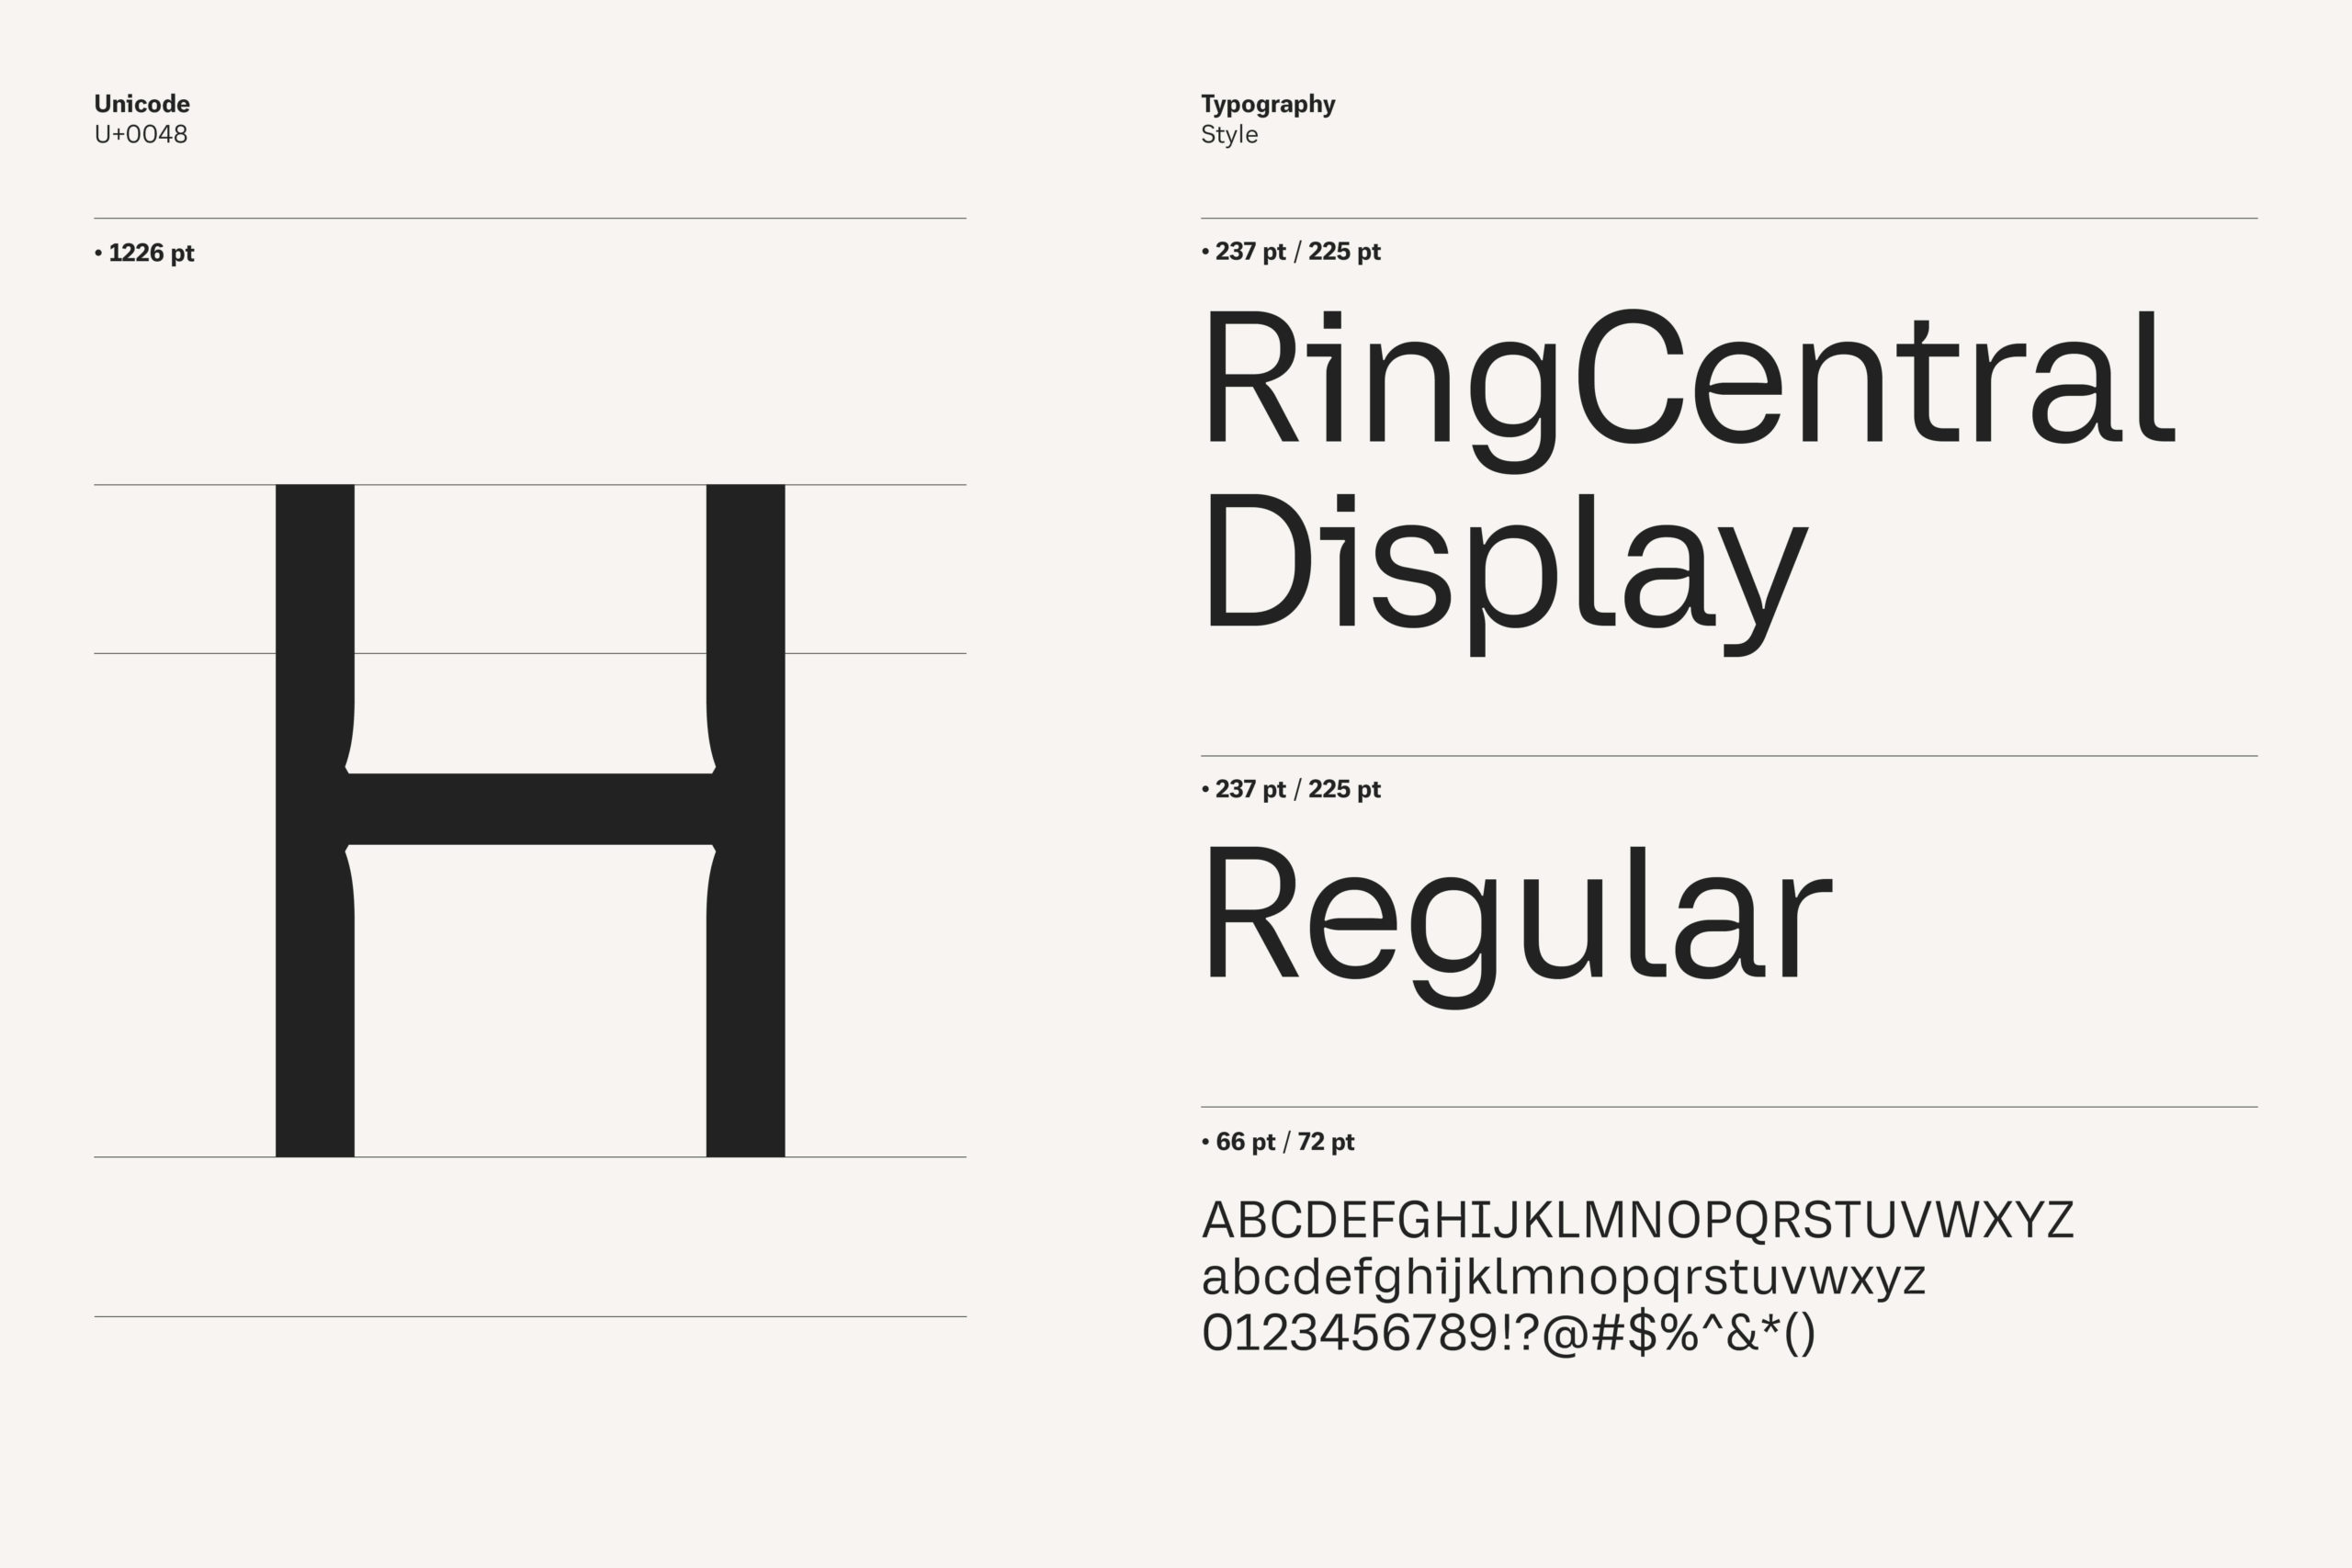 RingCentral Display_Typeface_0914224